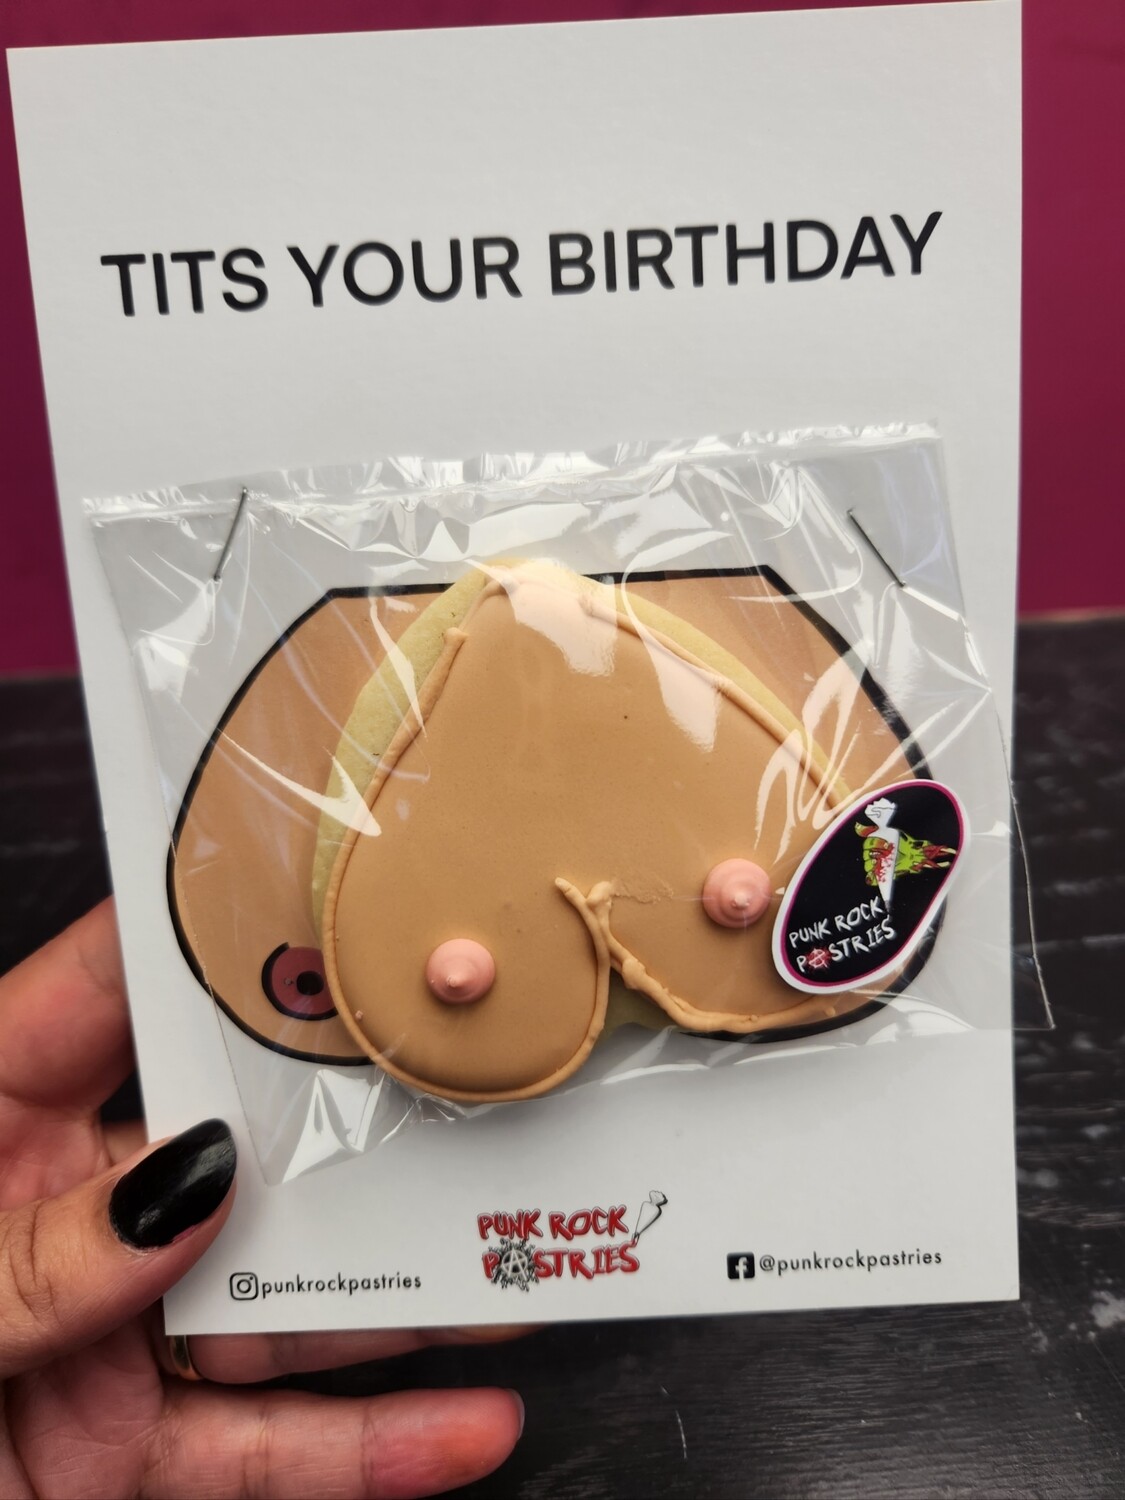 Tits your birthday cookie card